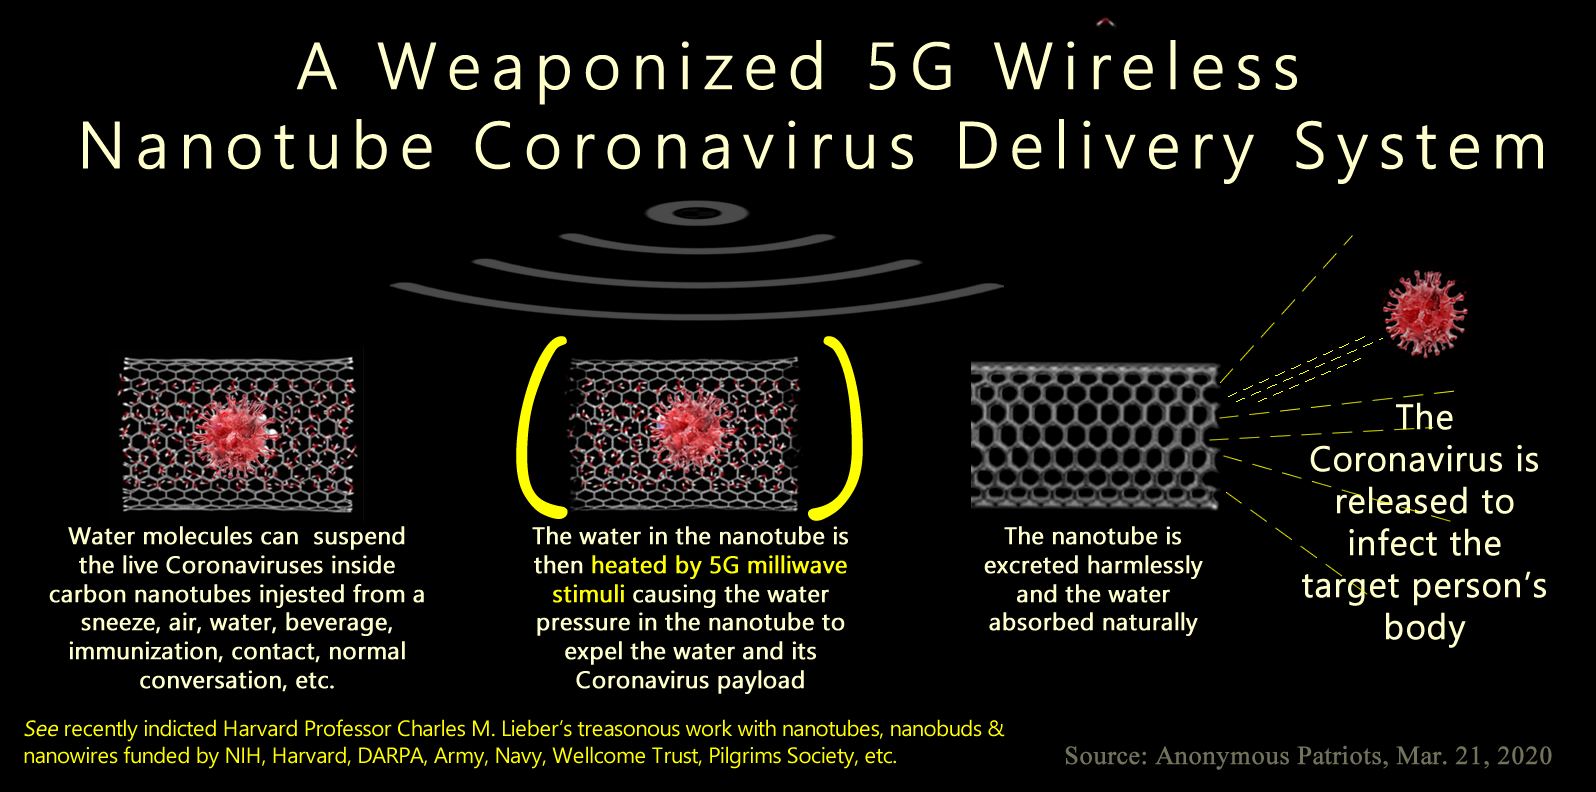 A Weaponized 5G Wireless Nanotube Coronavirus Delivery System that Fauci paid Lieber to build.